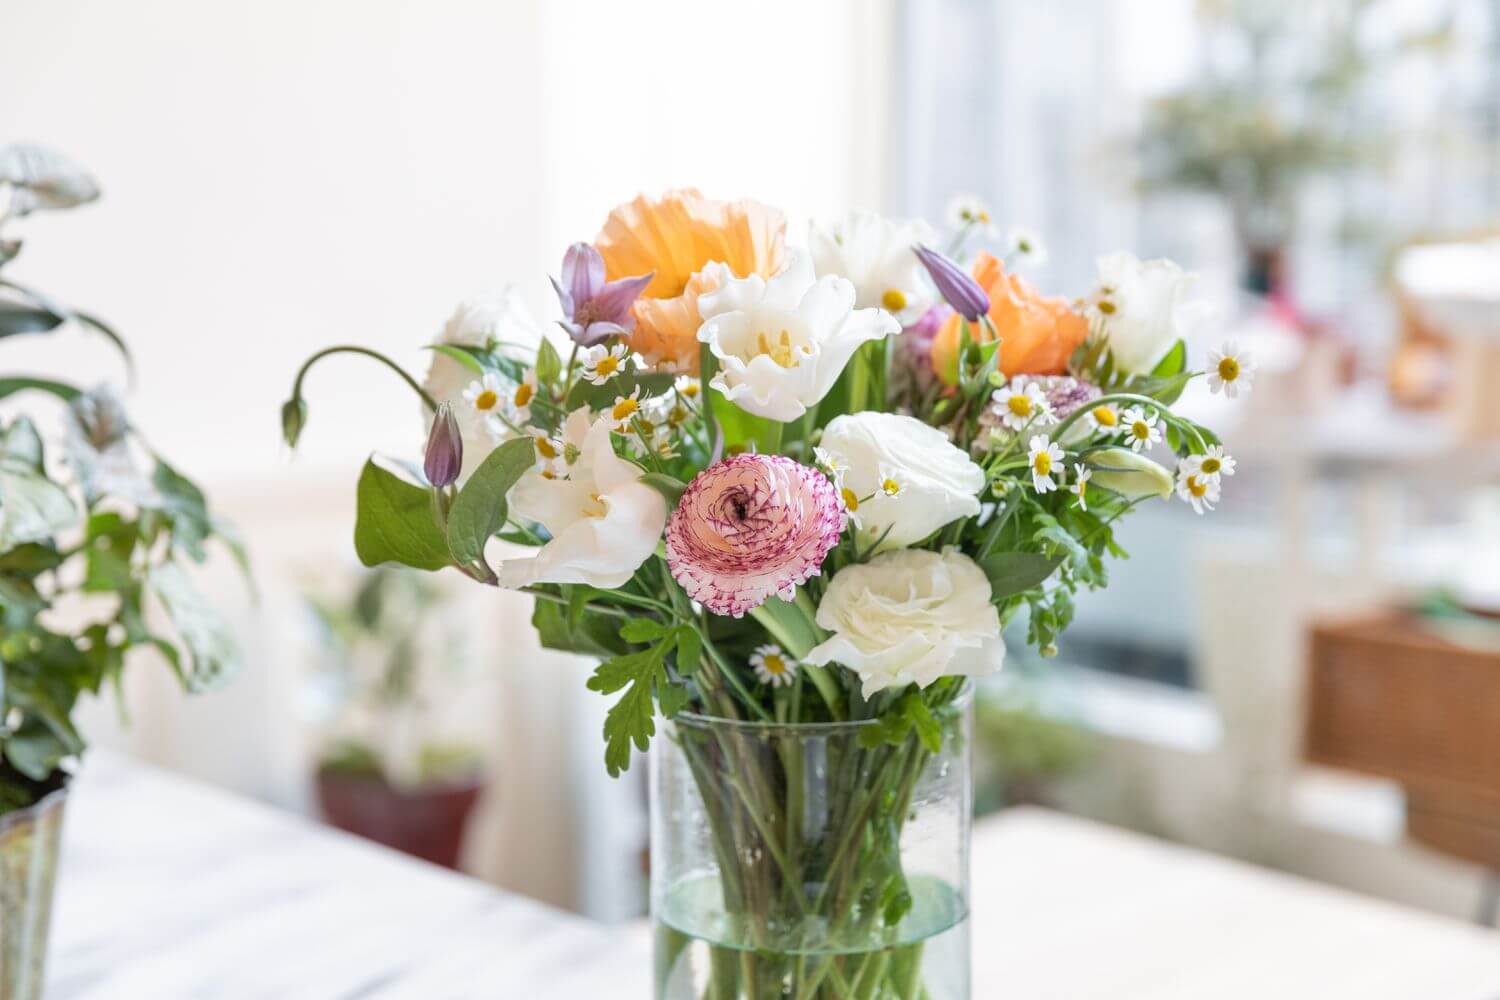 Long-Lasting Flowers for Bouquets